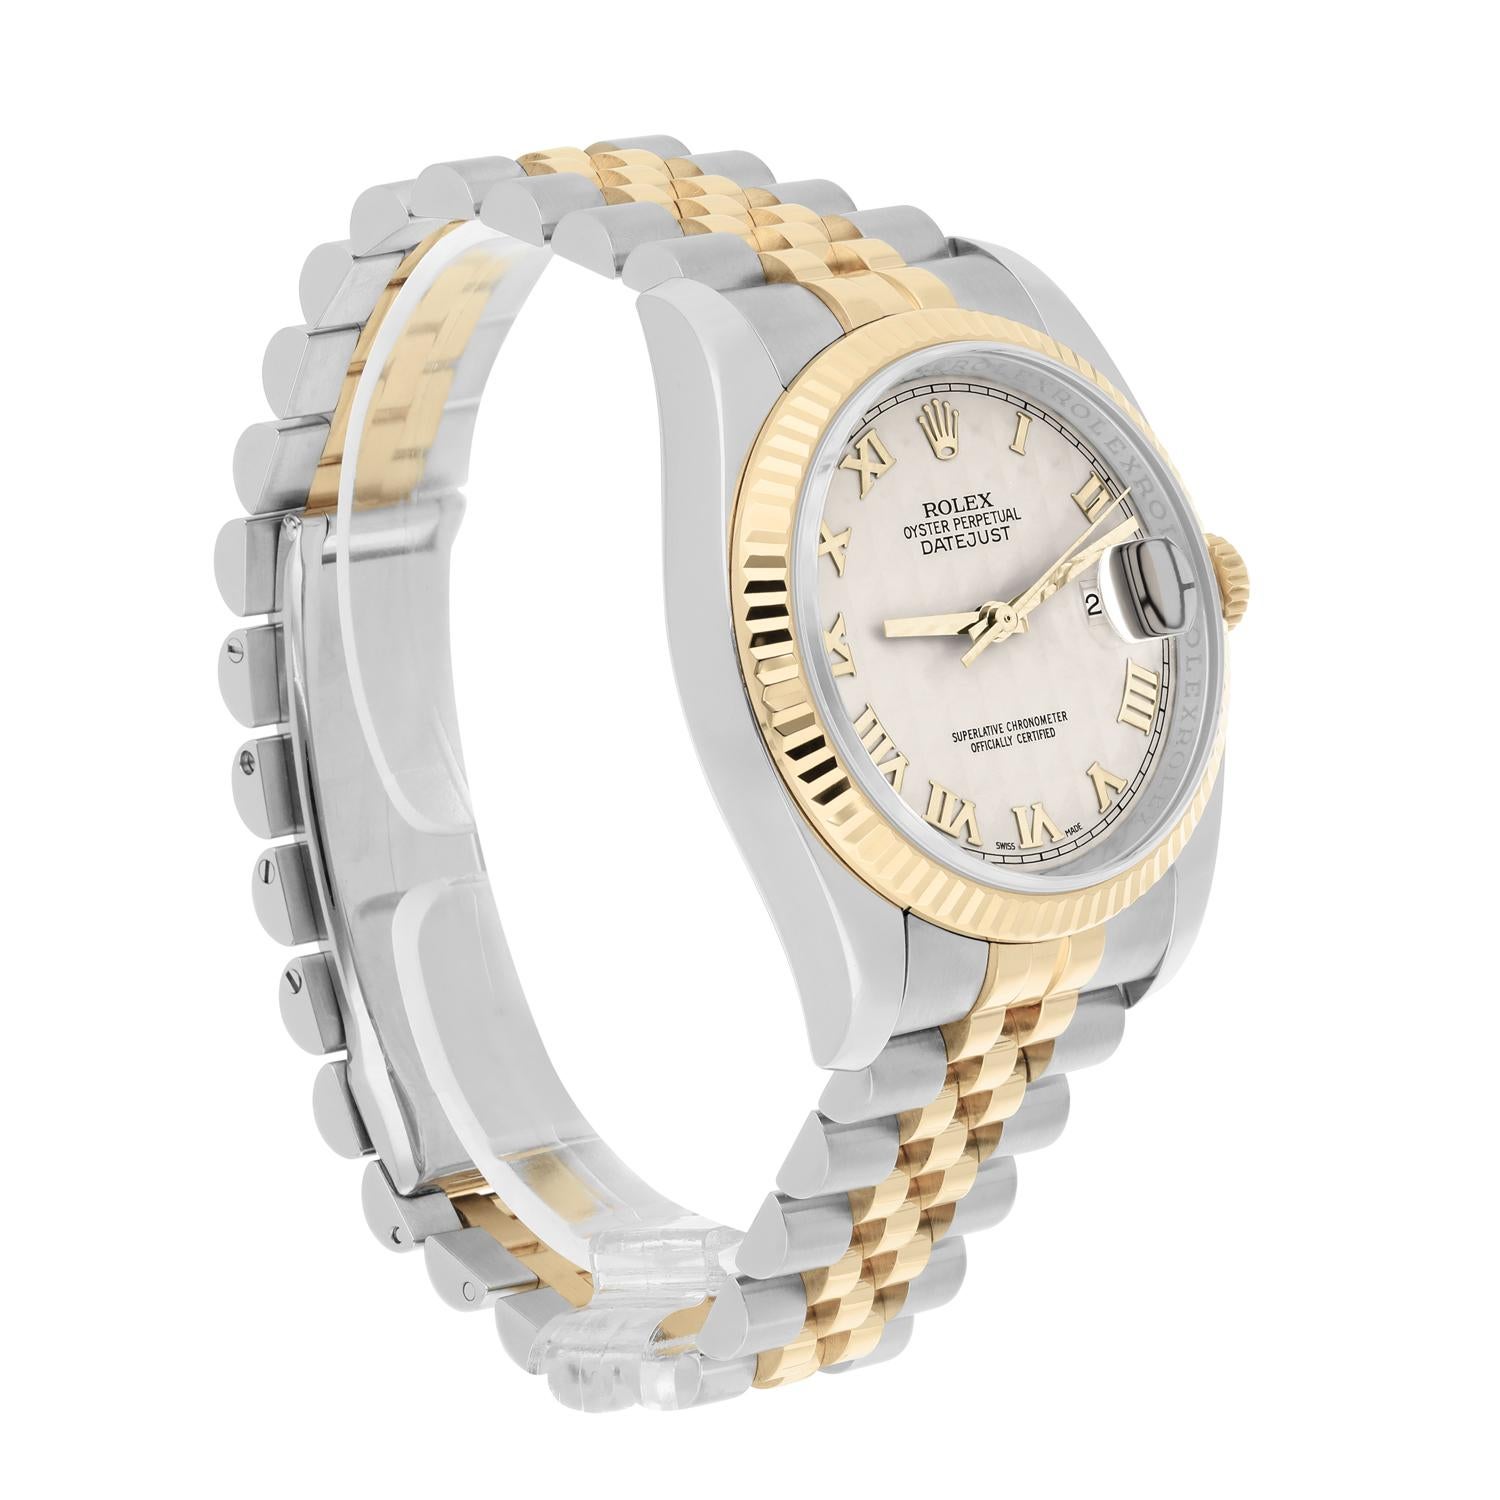 Rolex Datejust 36 Gold and Steel 116233 Ivory Pyramid Roman Dial Jubilee Watch For Sale 1